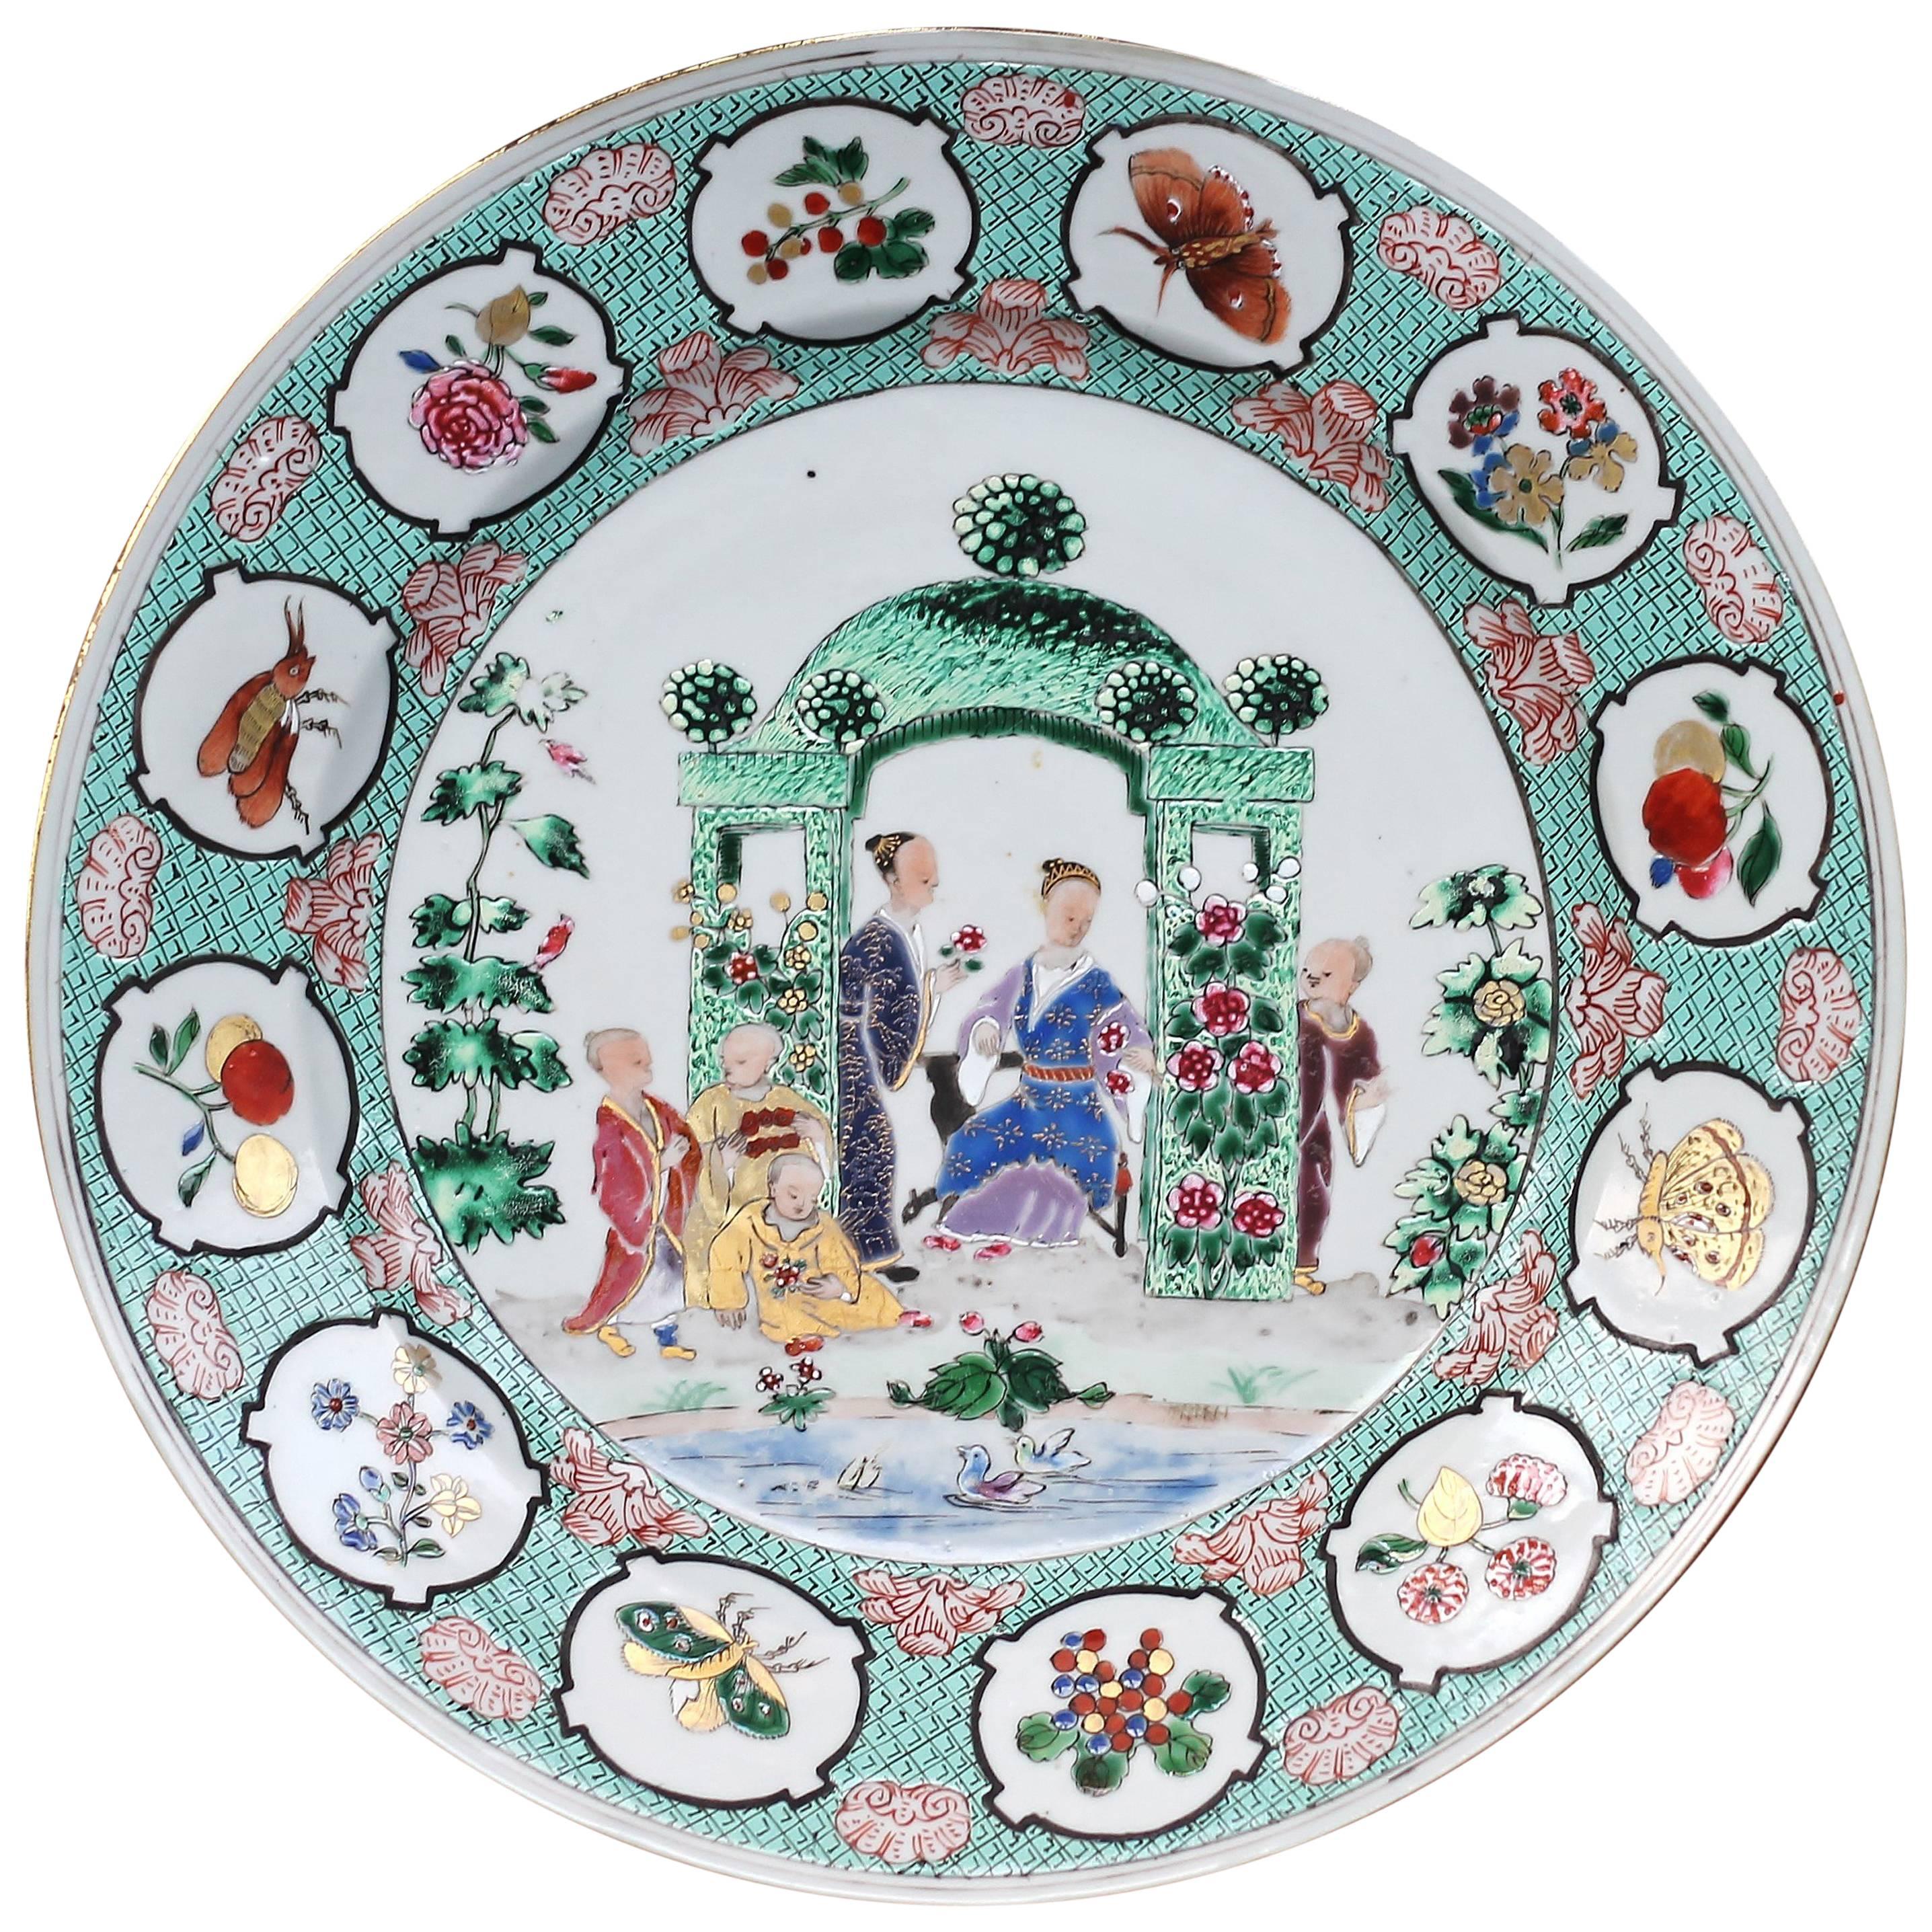 Chinese Export Famille Rose ‘Pronk Arbor’ Dish, circa 1738-1740